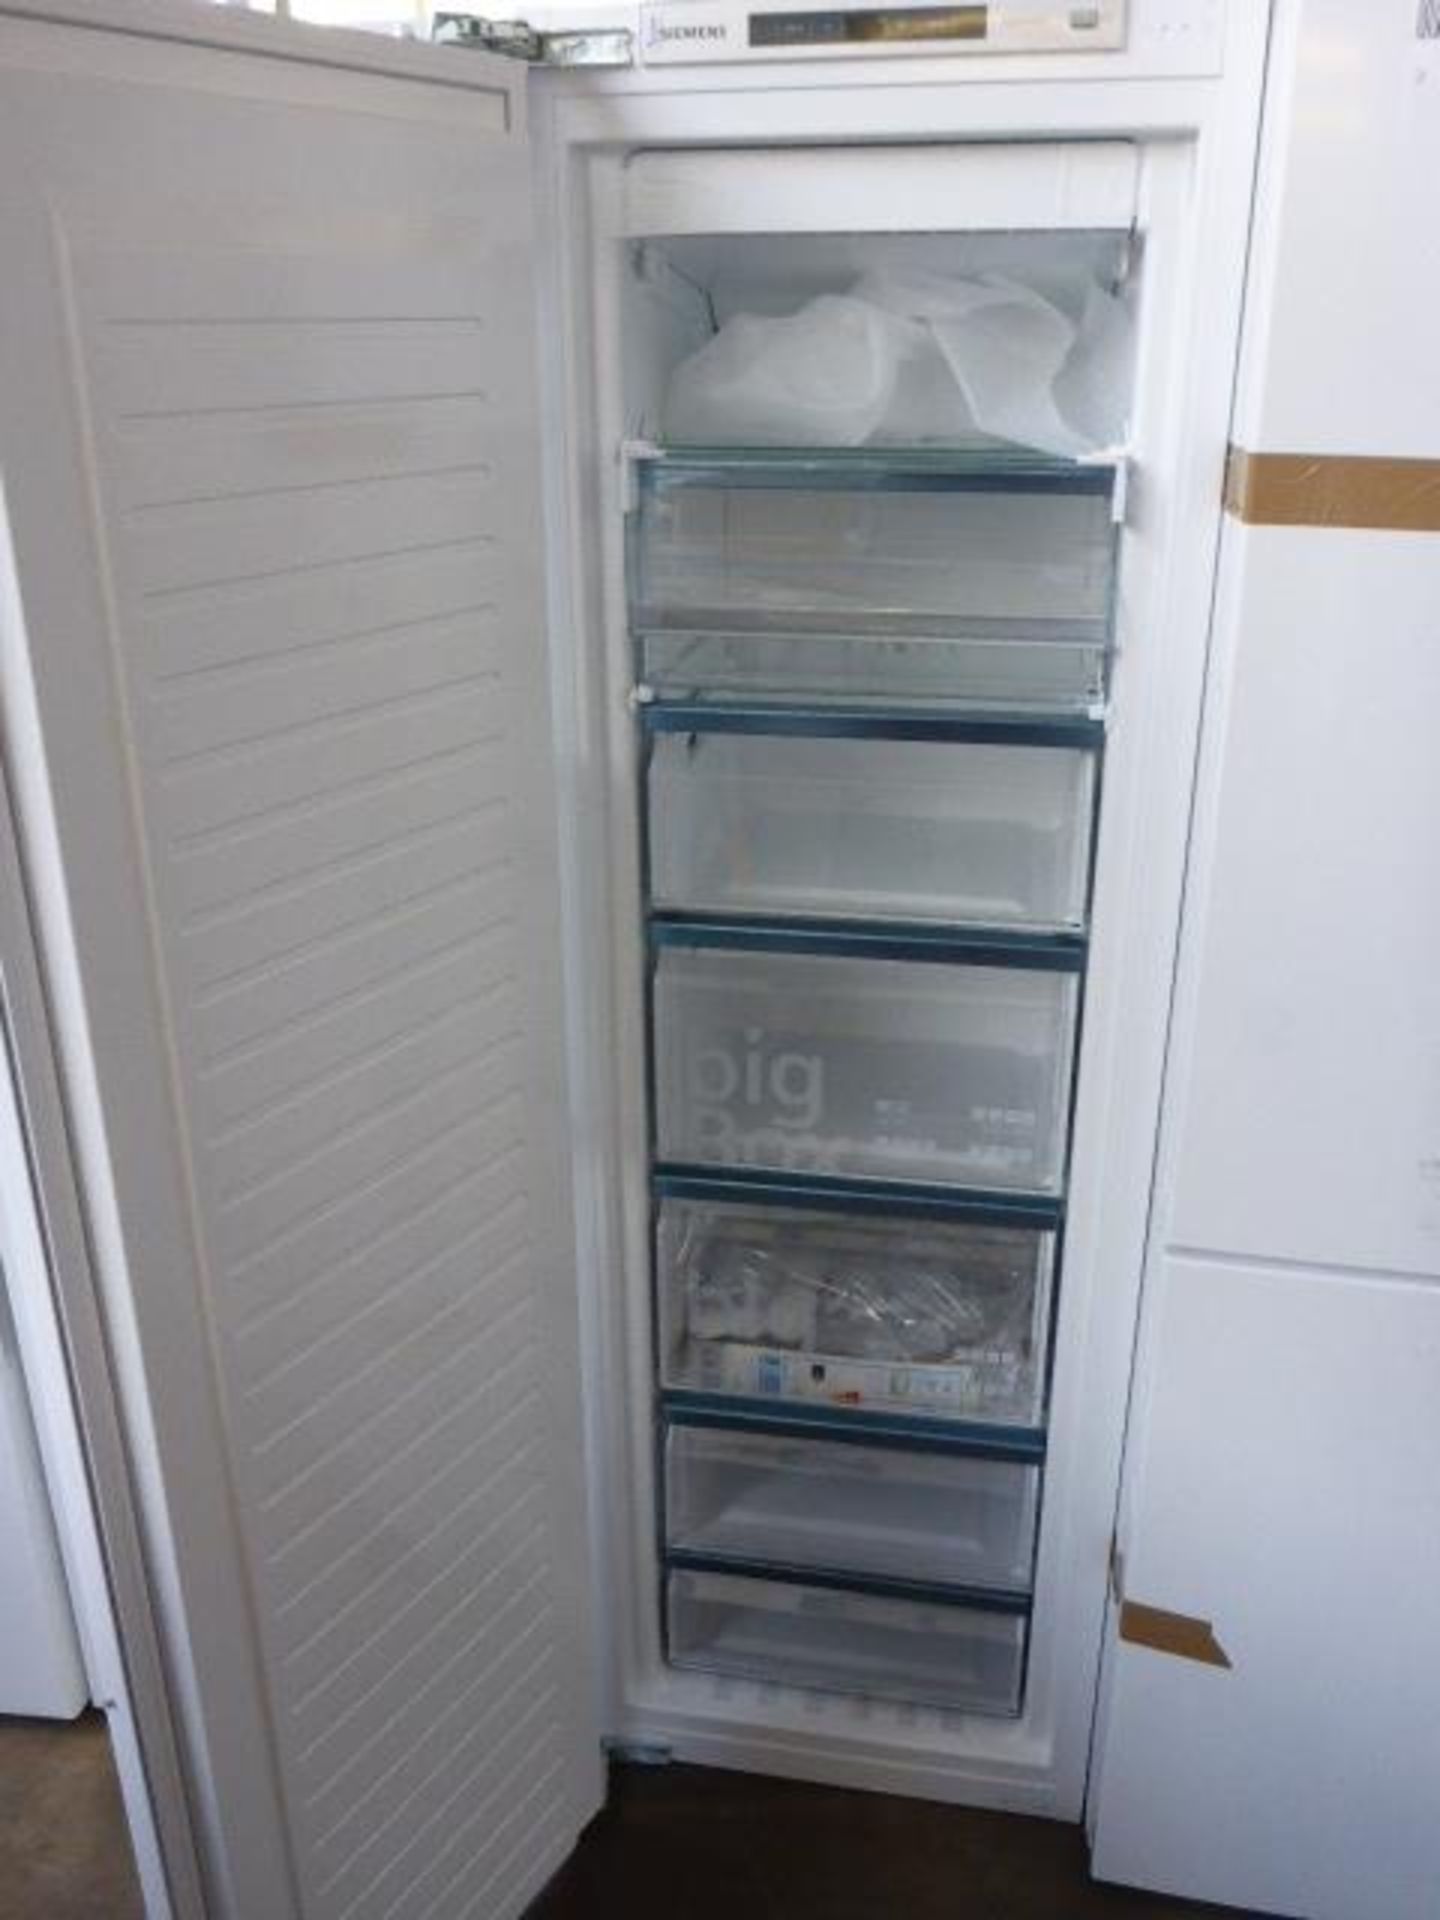 GI81NAEF0GB Siemens Built-in upright freezer - Image 2 of 2